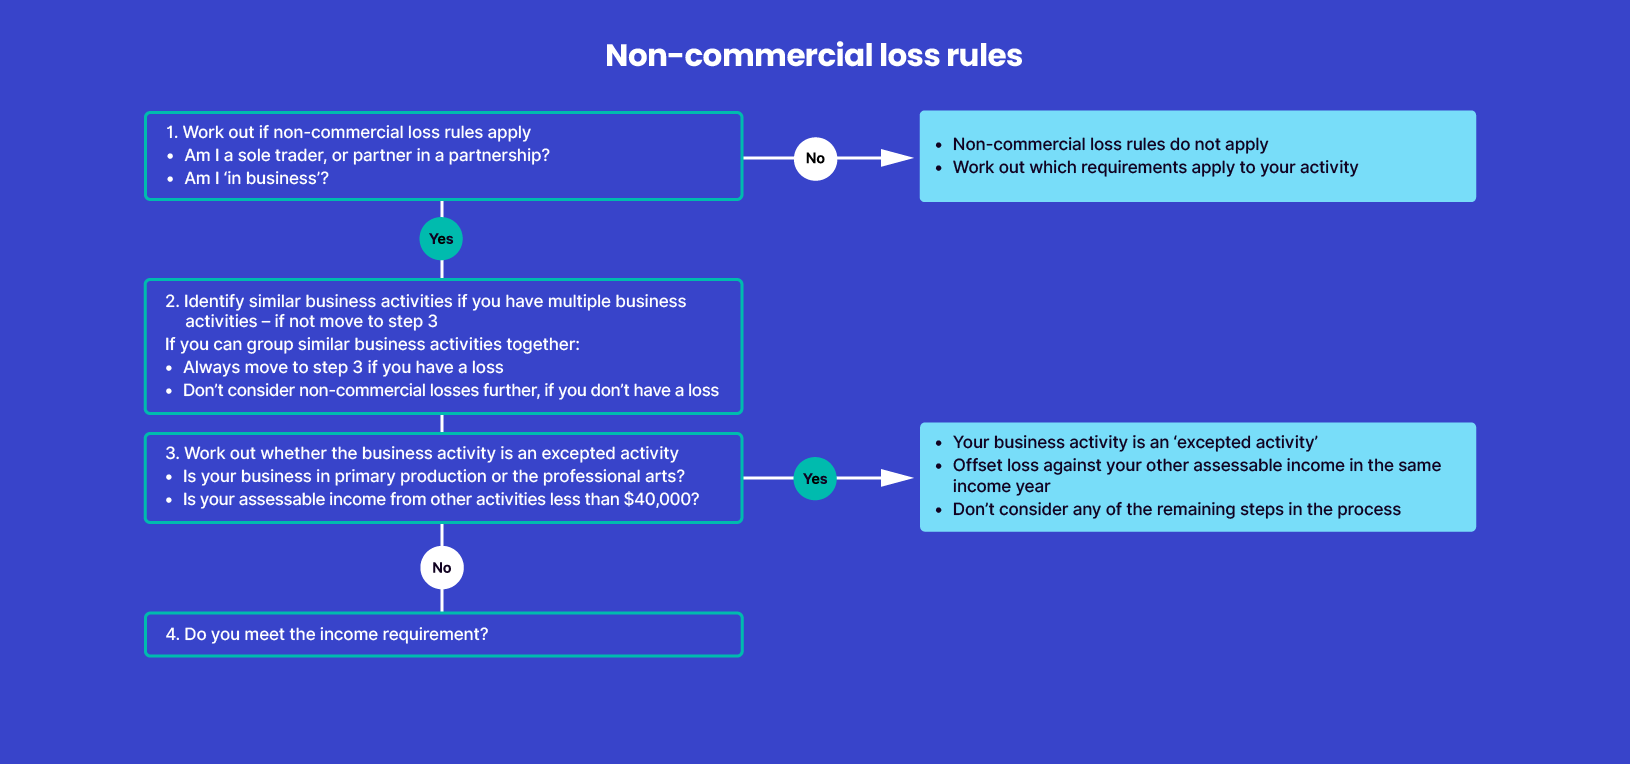 Diagram representing the non-commercial loss rules. In step 3, work out whether the business activity is an ‘excepted activity’. If it is, you can offset your loss against your other assessable income in the same income year and you don’t consider any of the remaining steps in the process. If it isn’t go to step 4.